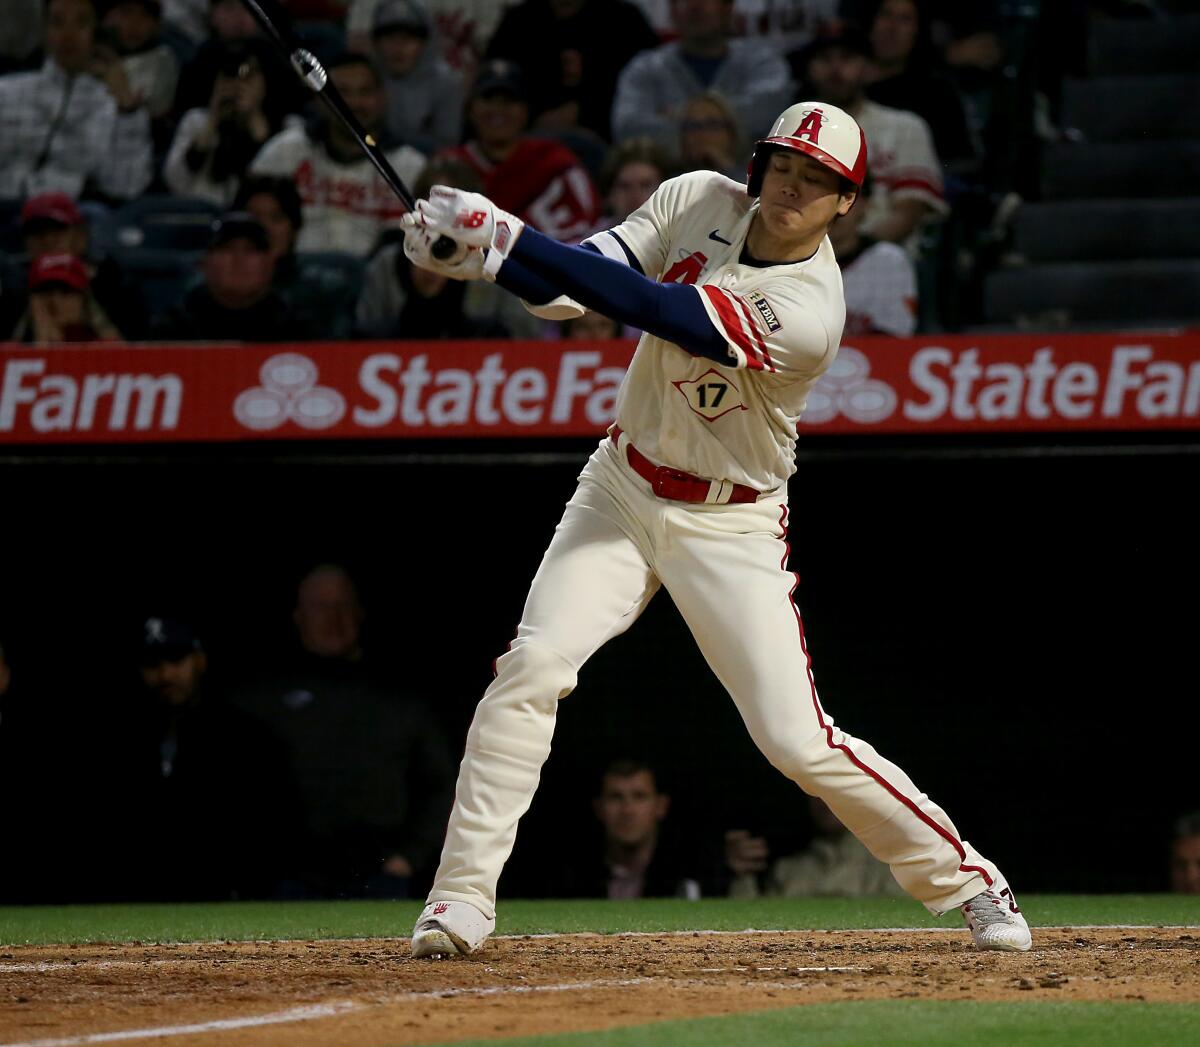 The Angels' Shohei Ohtani strikes out against the Houston Astros in the ninth inning at Angels Stadium.